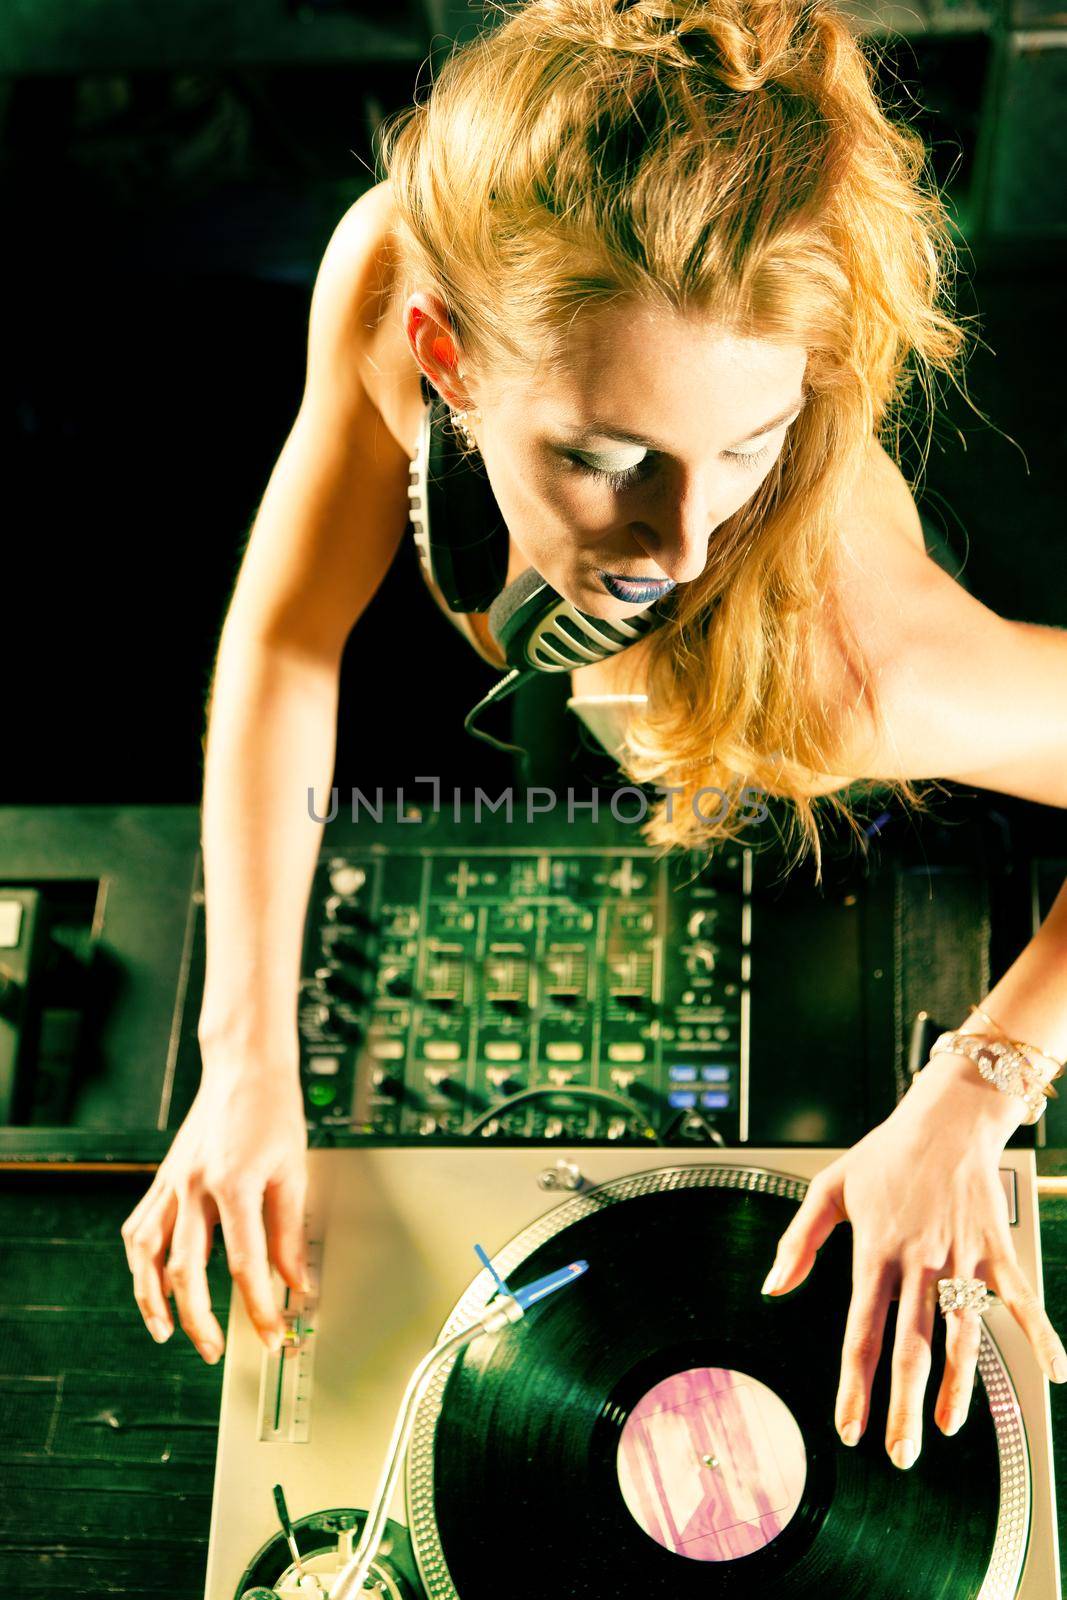 Female DJ at the turntable in a club, with mixer and old school record player